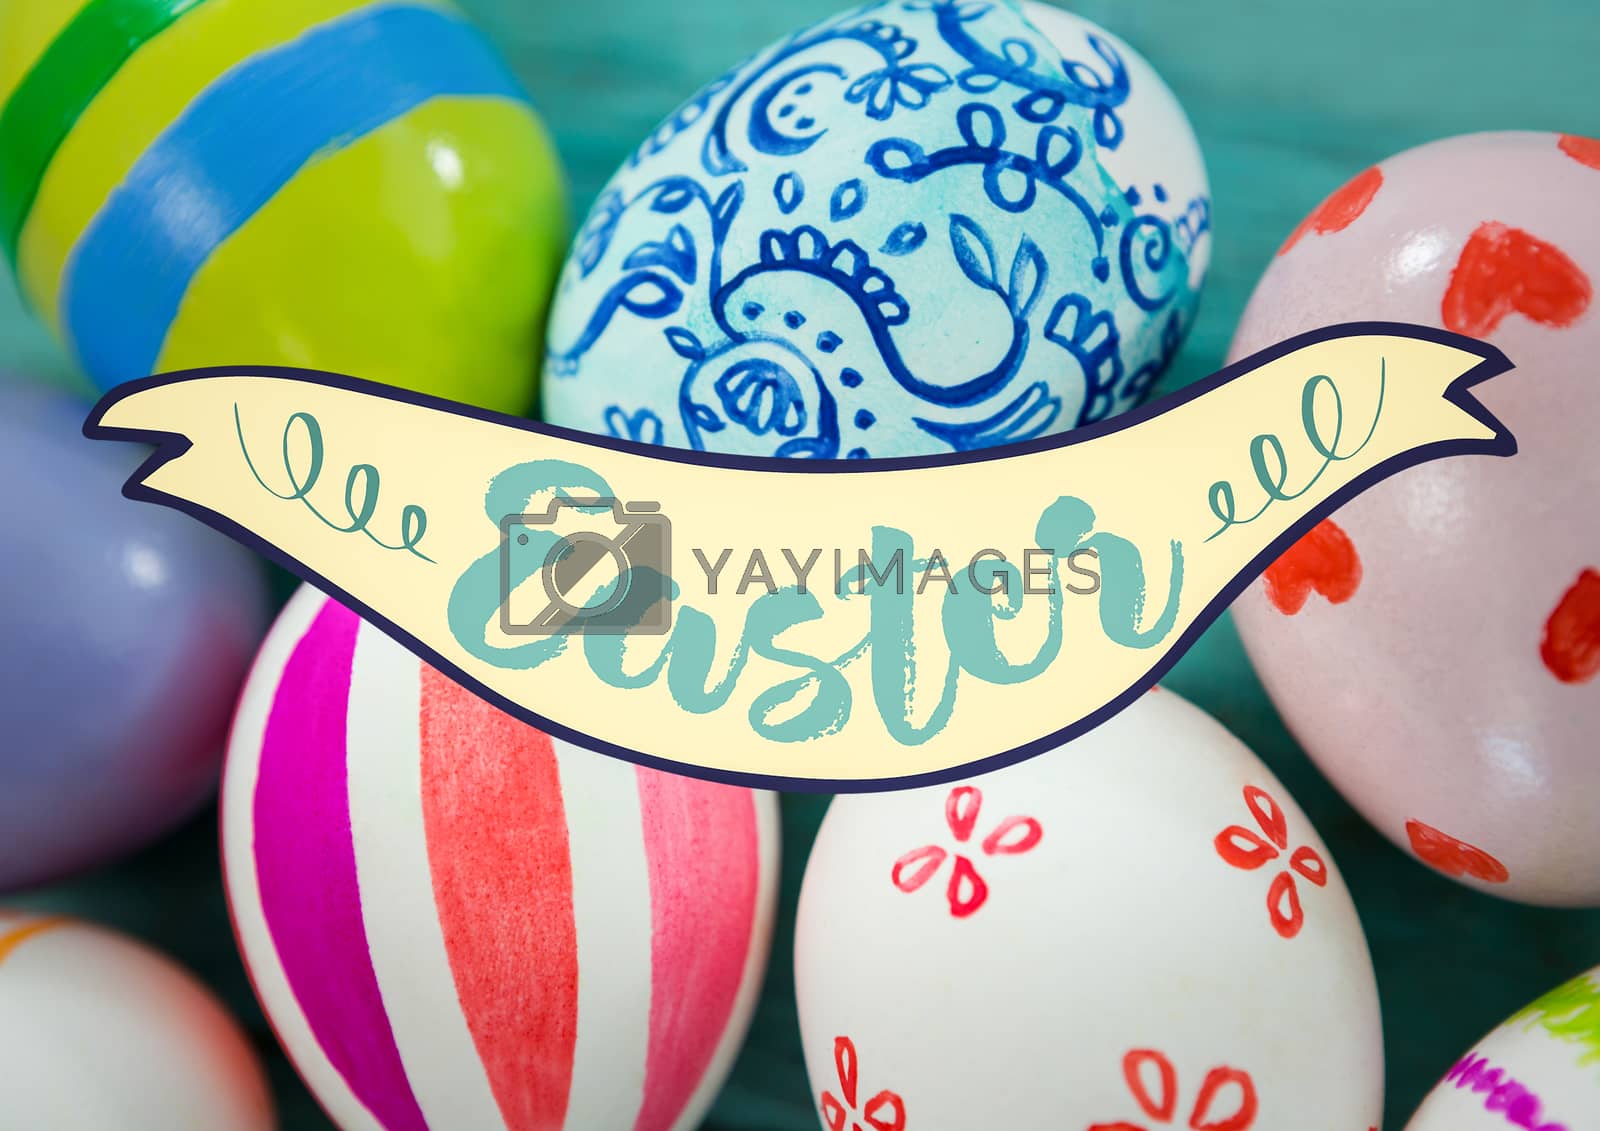 Royalty free image of Easter banner against eggs on teal table by Wavebreakmedia